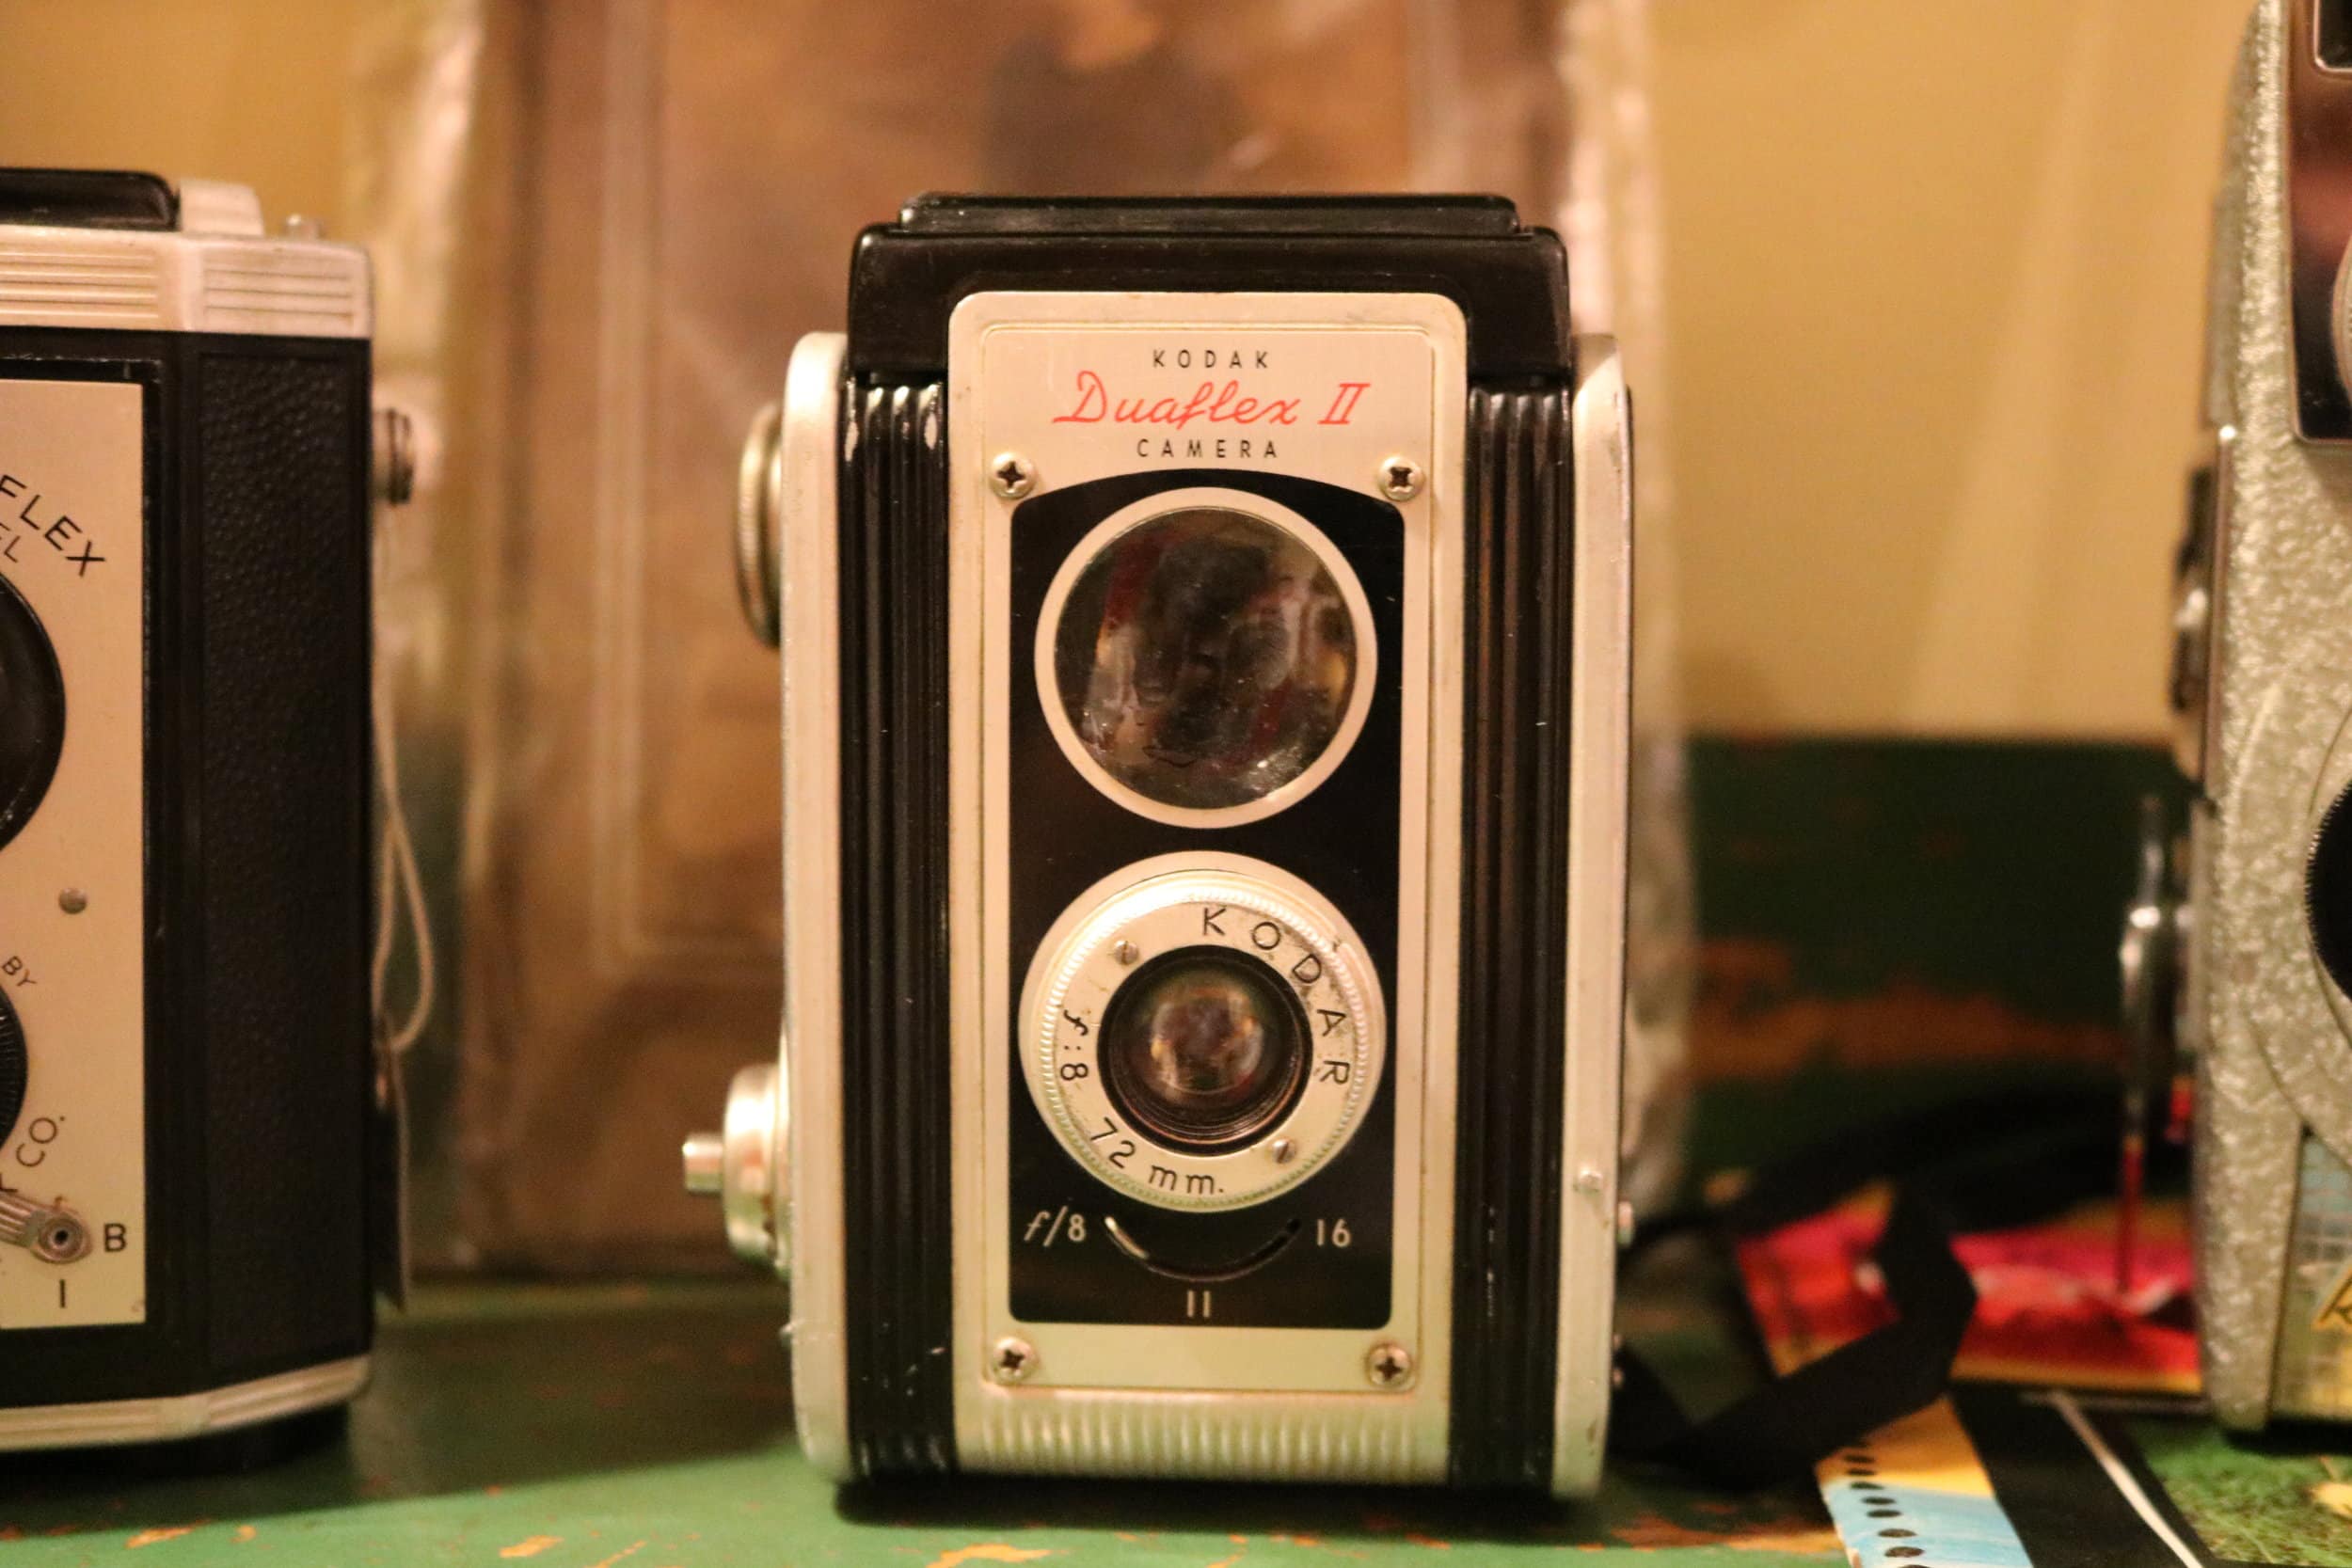 A Kodak Duaflex II camera for sale in the collection of cameras throughout the store.